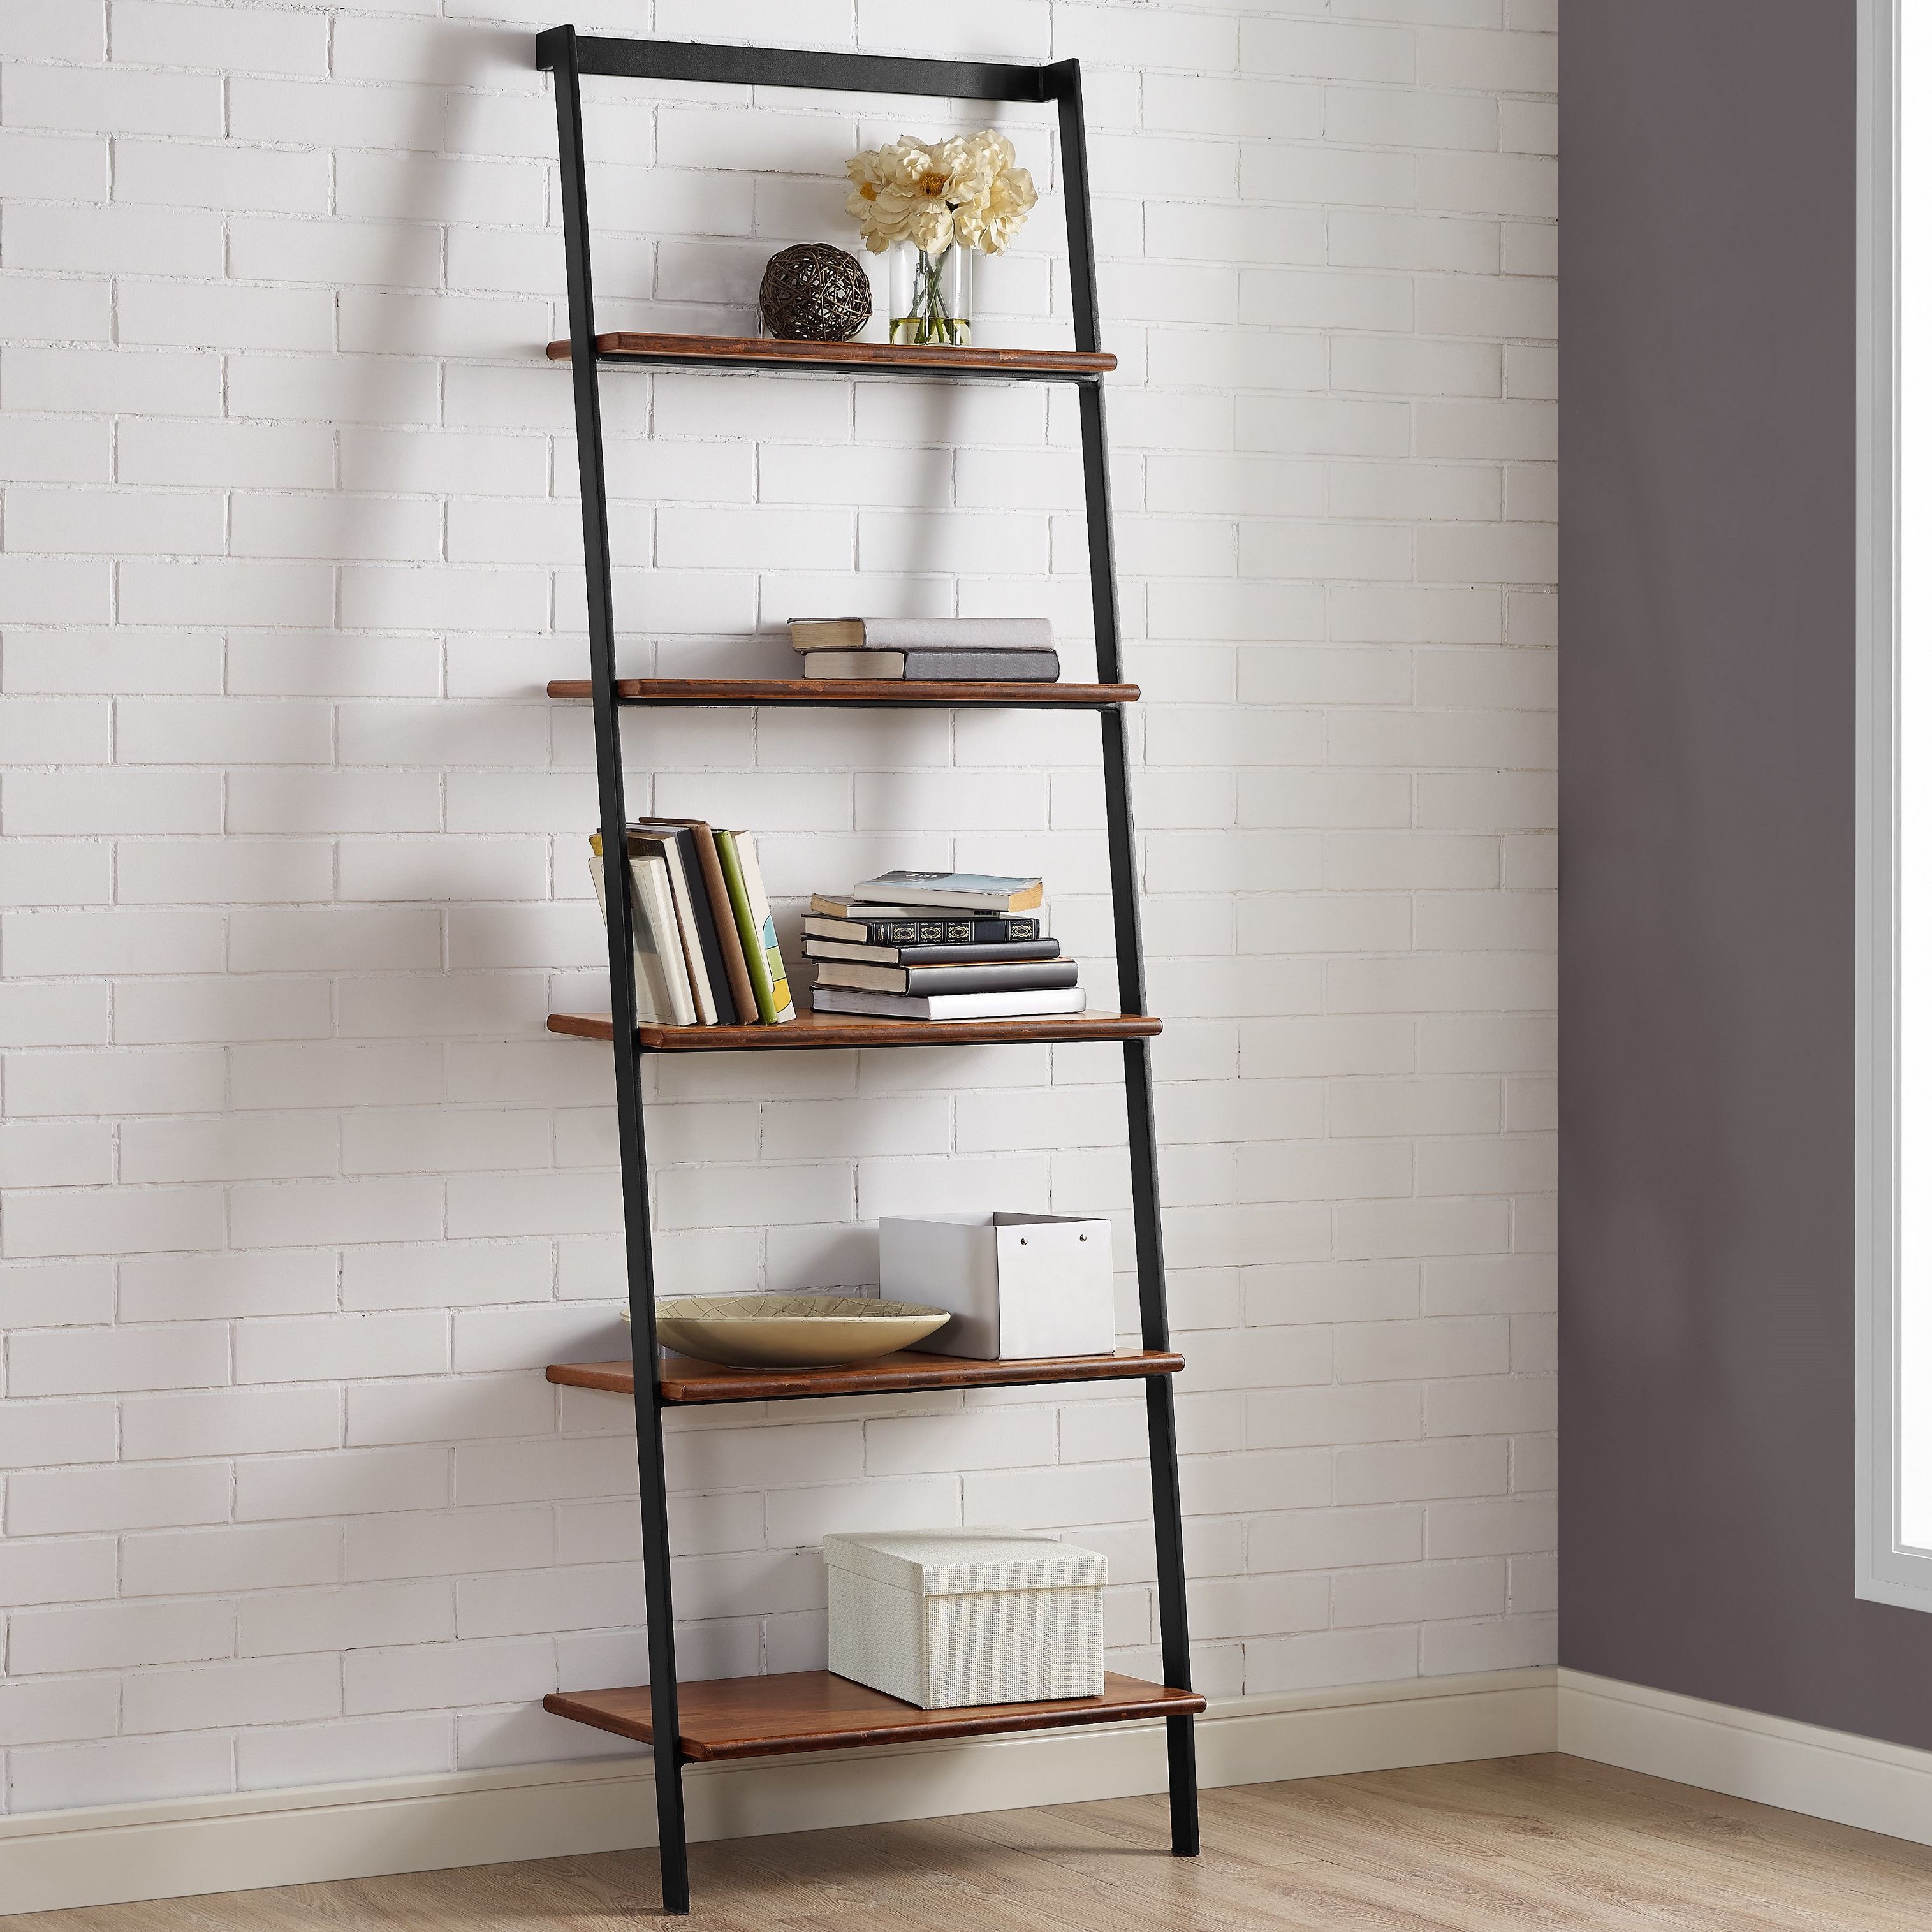 Best And Newest Nailsworth Ladder Bookcases Inside Studio Ladder Bookcase (View 14 of 20)